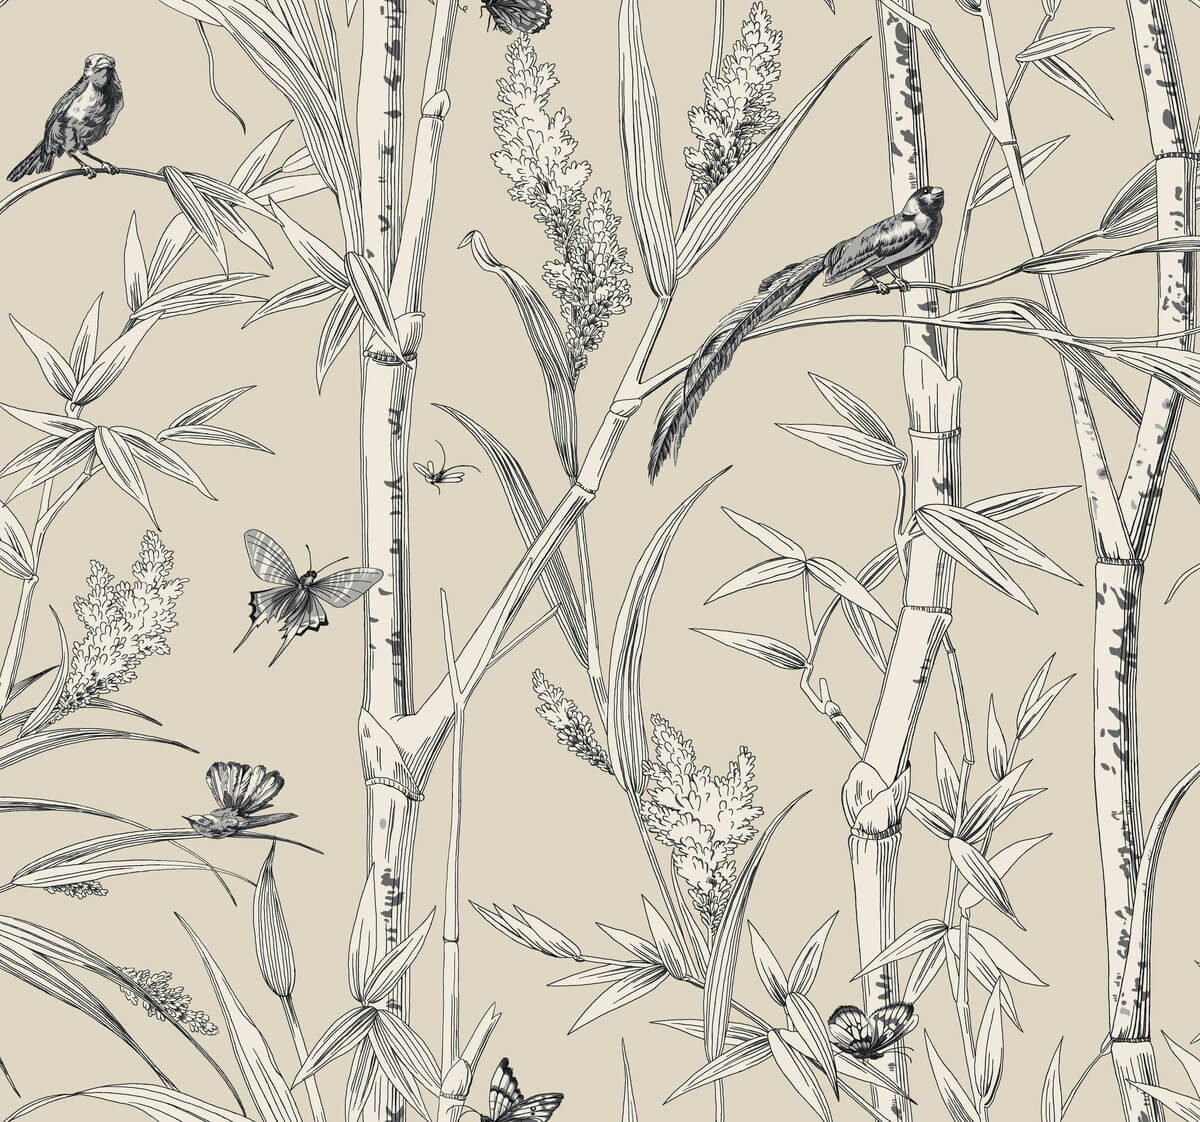 Toile Resource Library Wallpaper Collection - SAMPLE